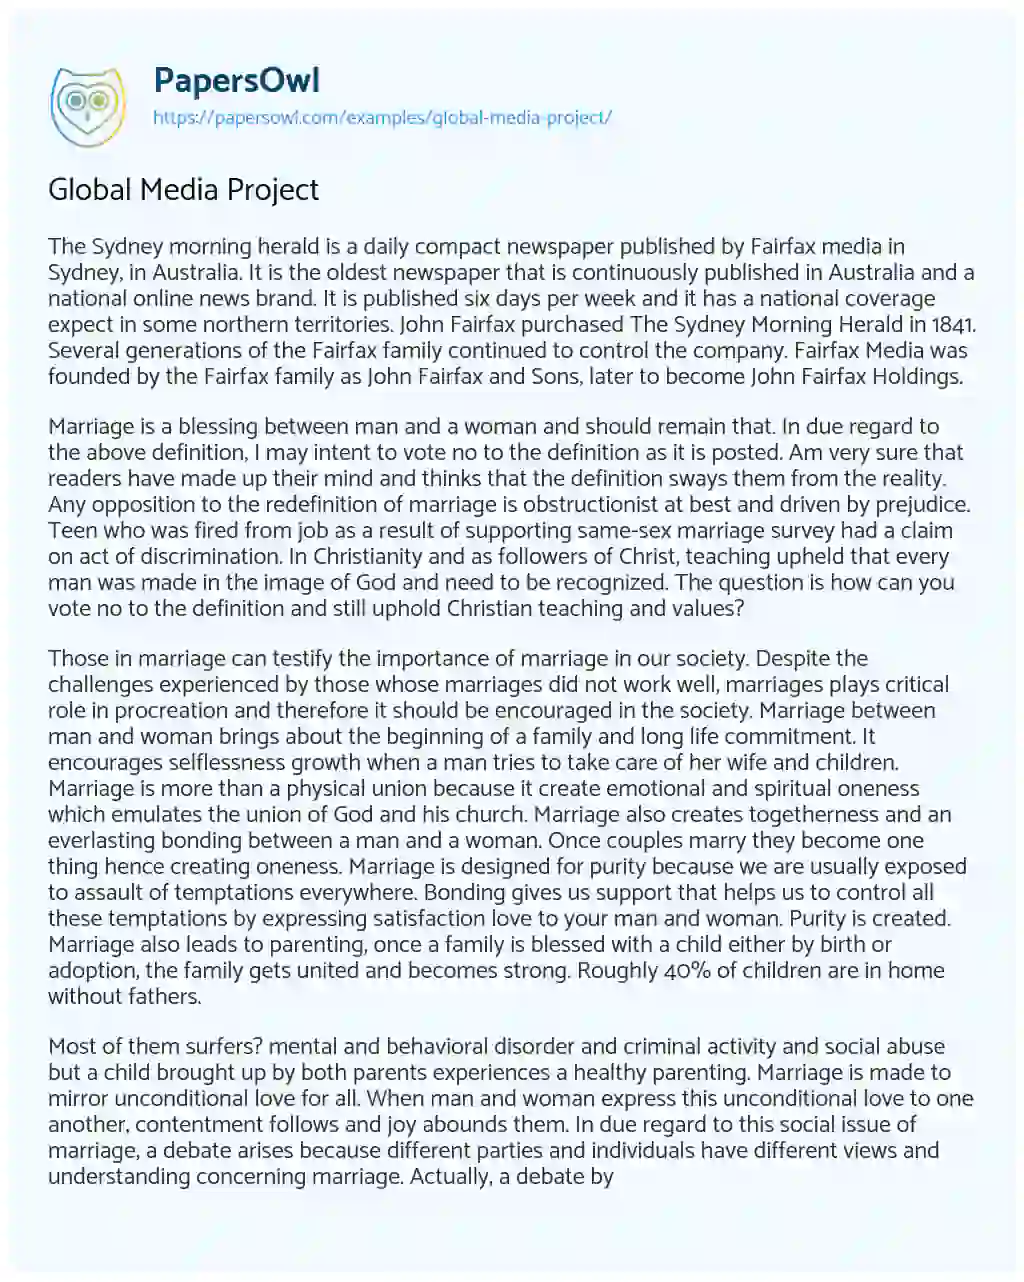 Essay on Global Media Project